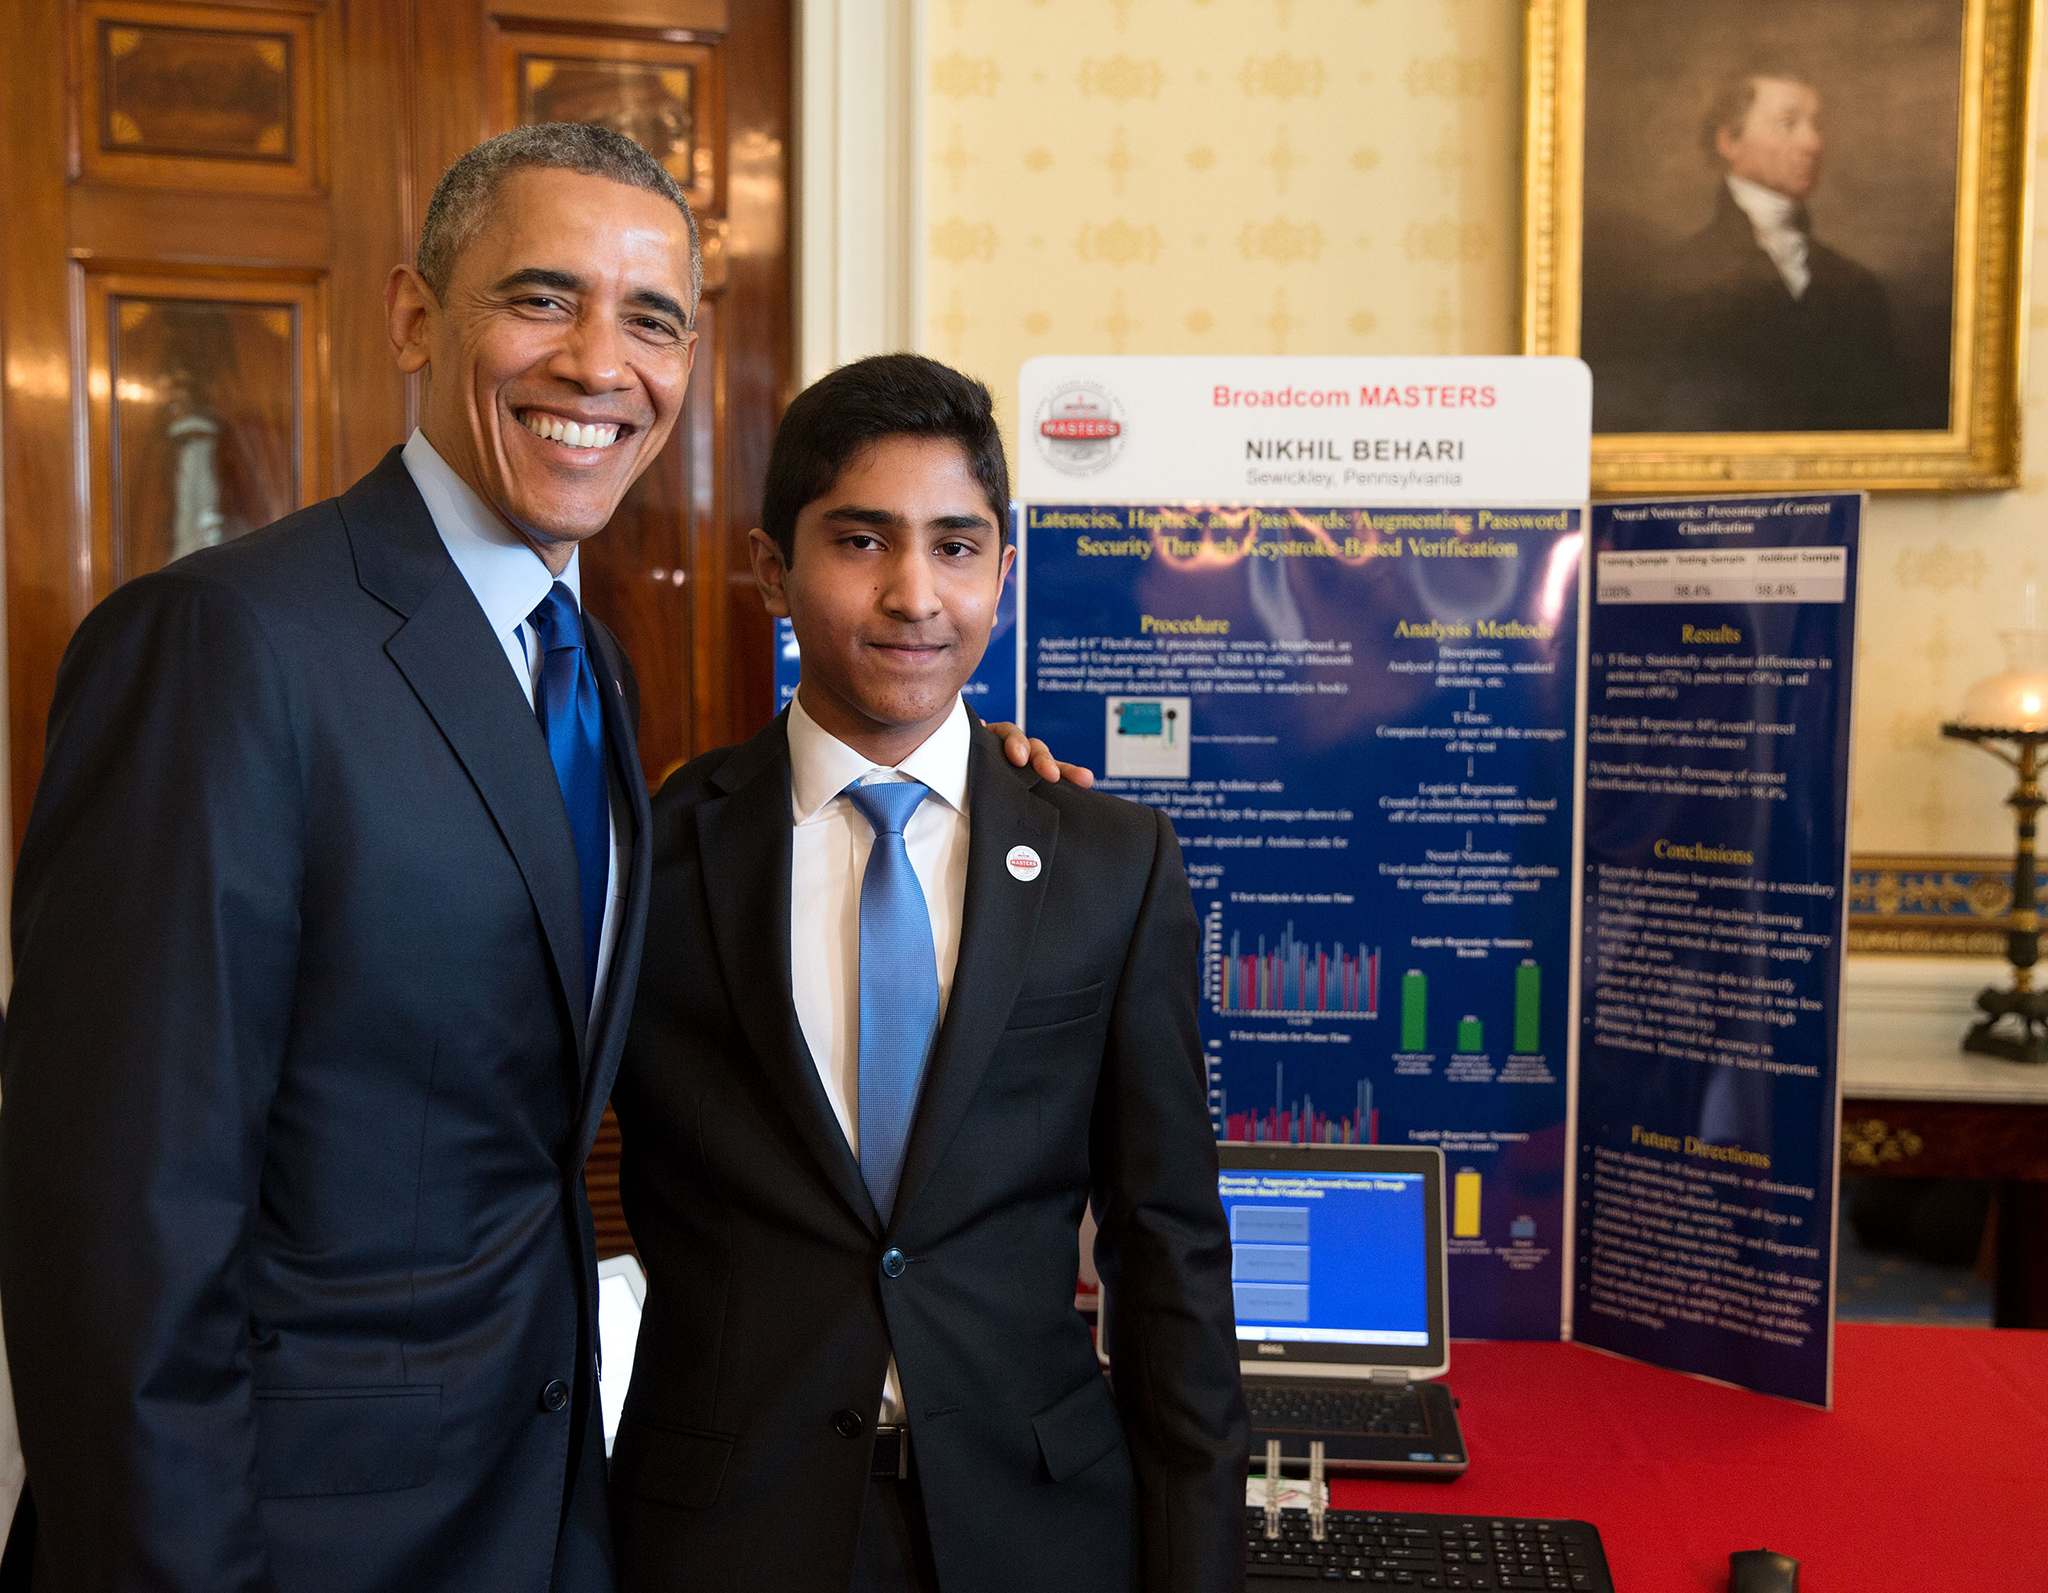 President Obama stands with Nikhil Behari in front of his project